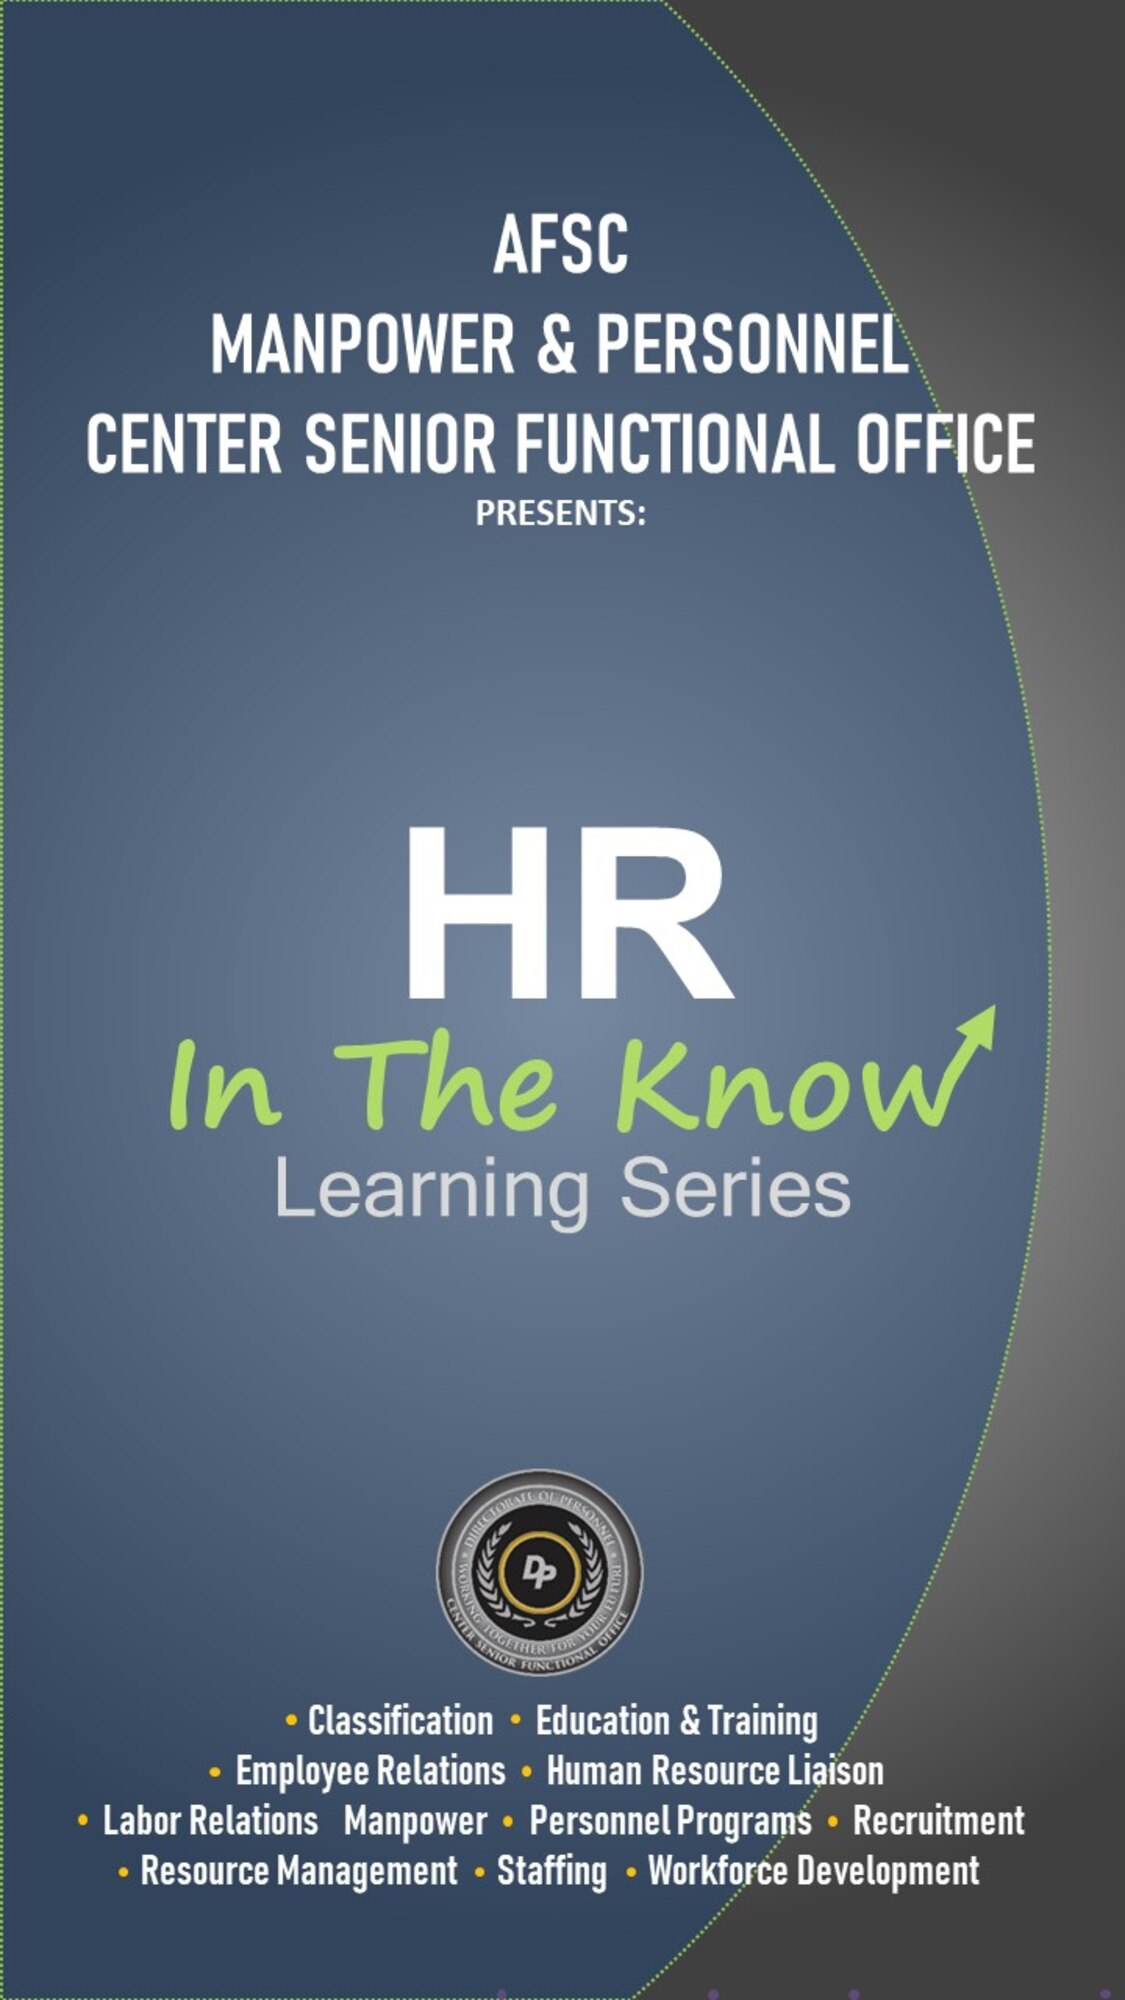 HR In the Know learning series